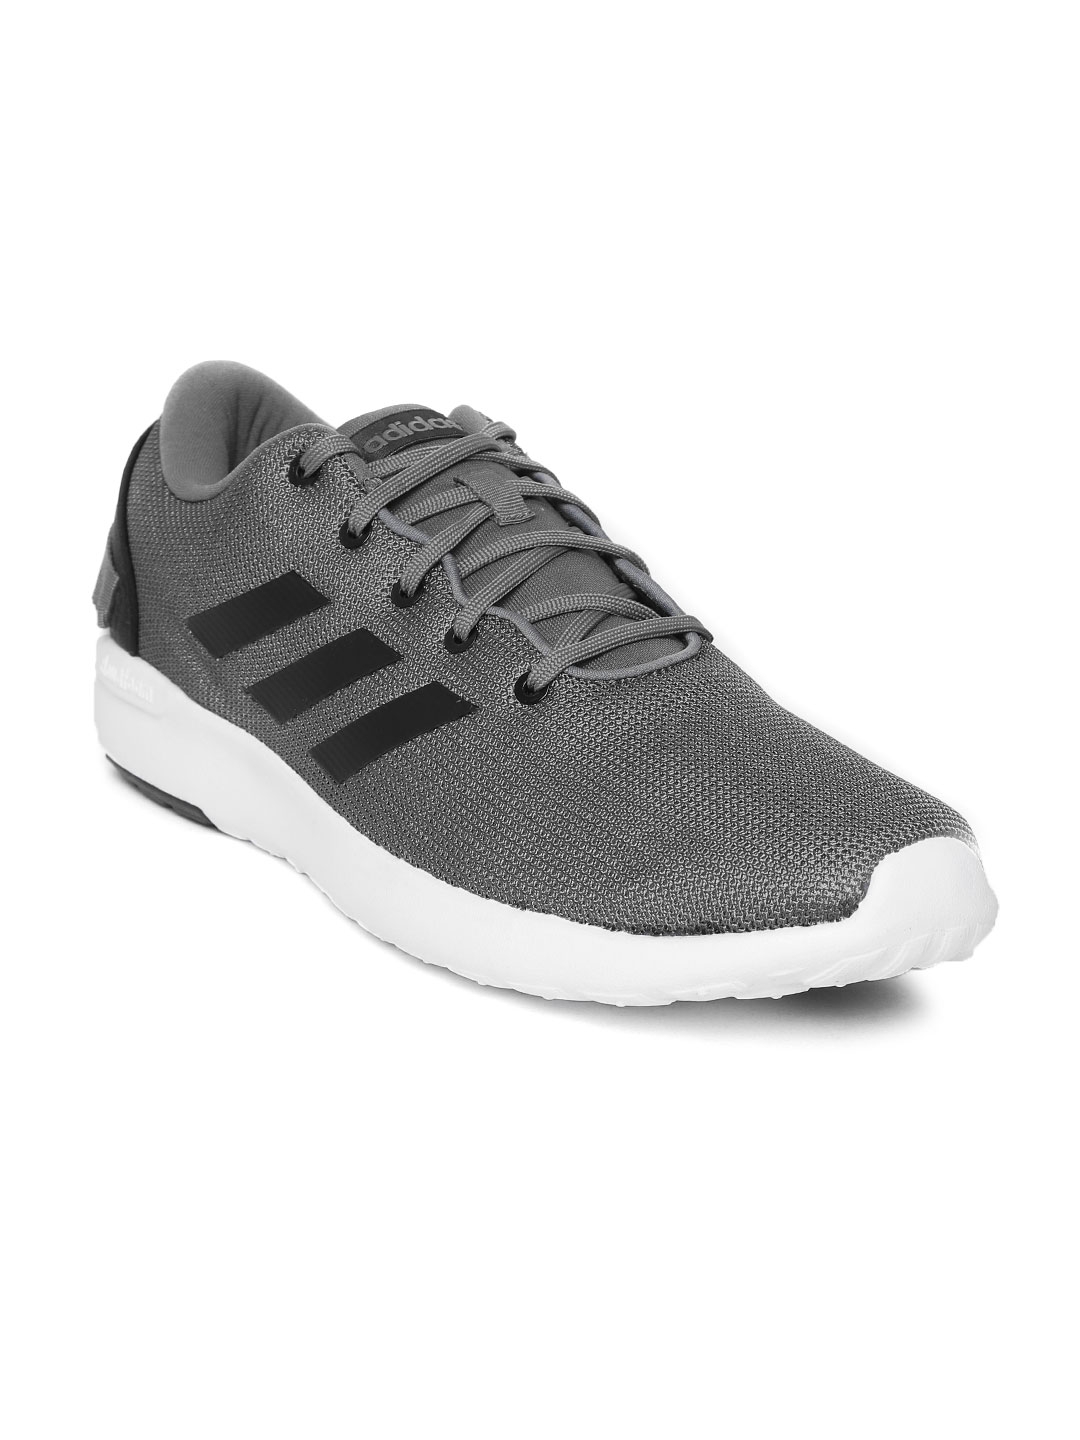 applause Revival Abolished Buy ADIDAS Men Grey Arcadies Running Shoes - Sports Shoes for Men 8617847 |  Myntra